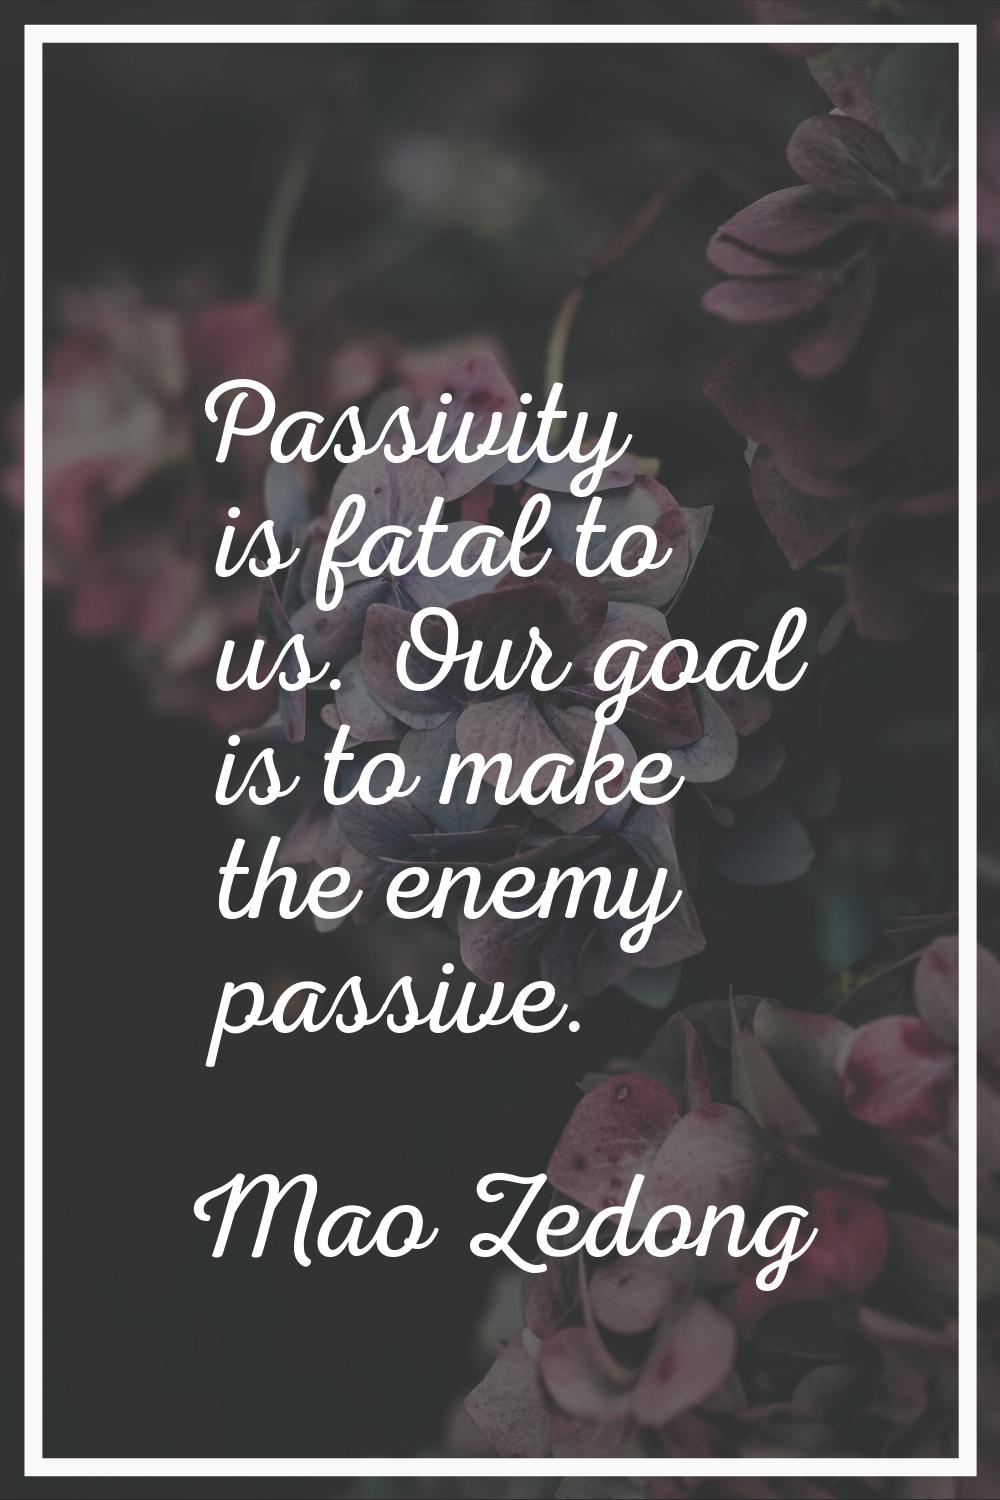 Passivity is fatal to us. Our goal is to make the enemy passive.